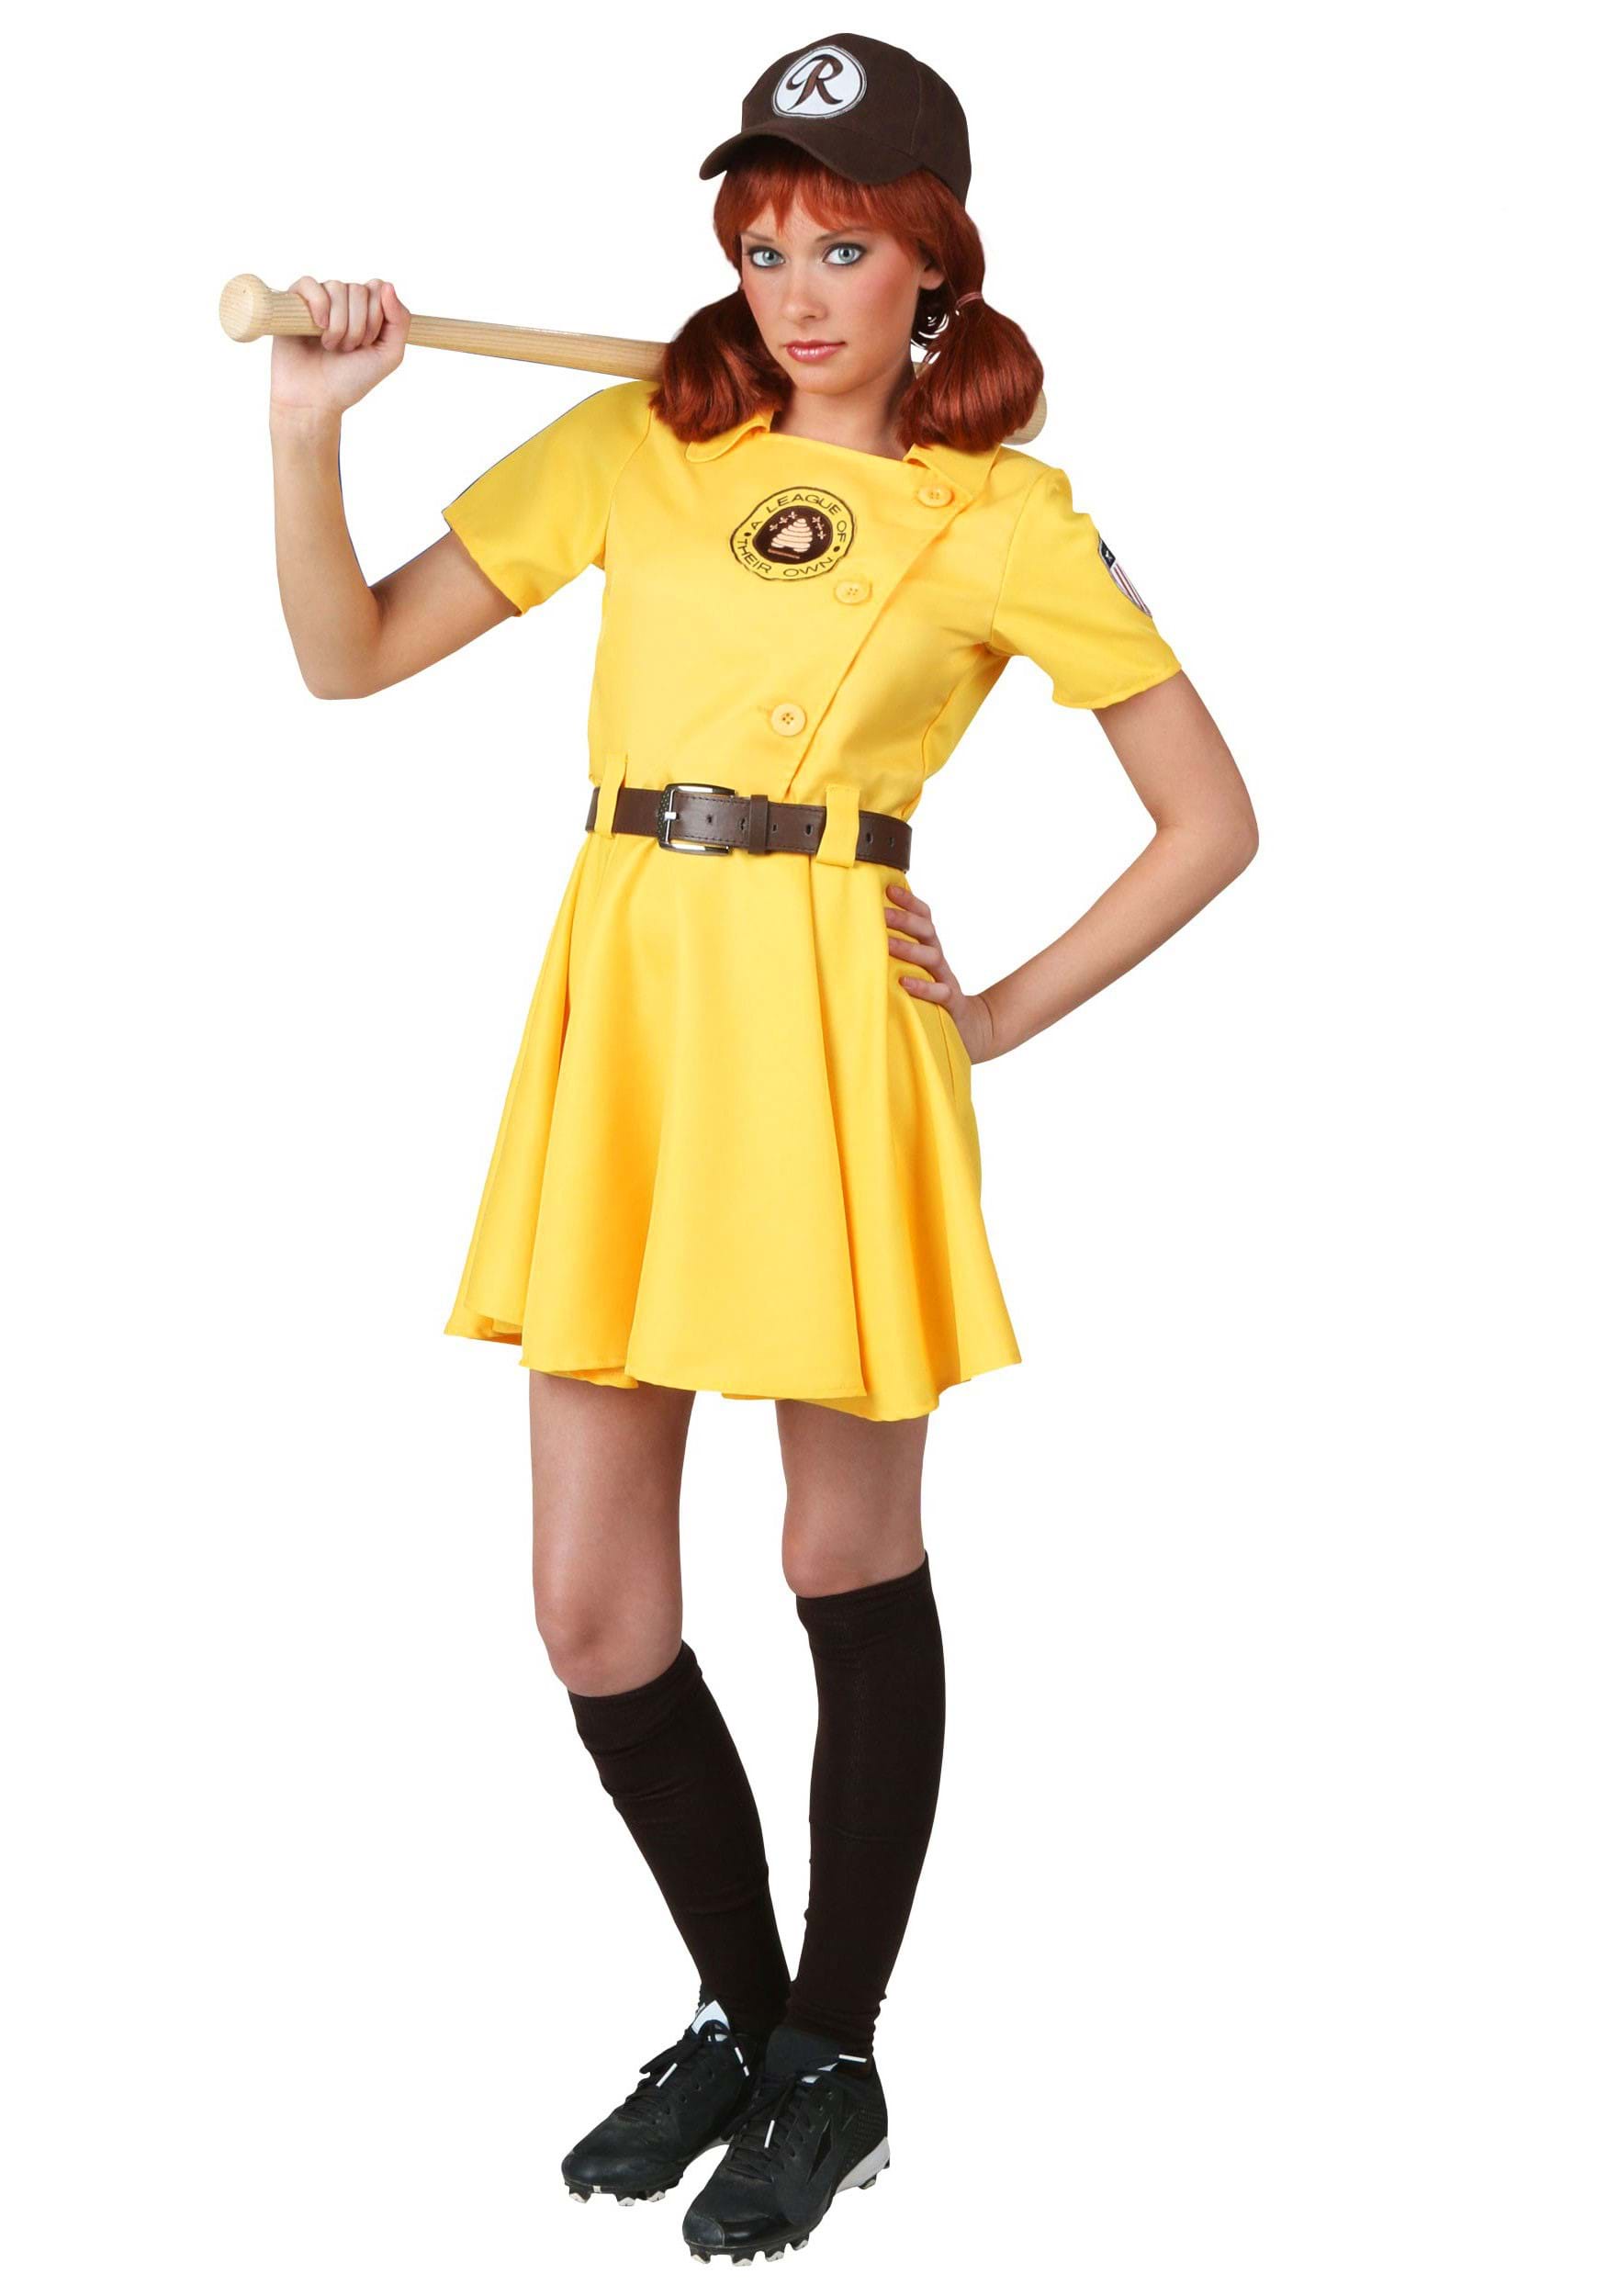 Image of Women's A League of Their Own Kit Baseball Uniform Costume | Exclusive Costumes ID LEA8302AD-M